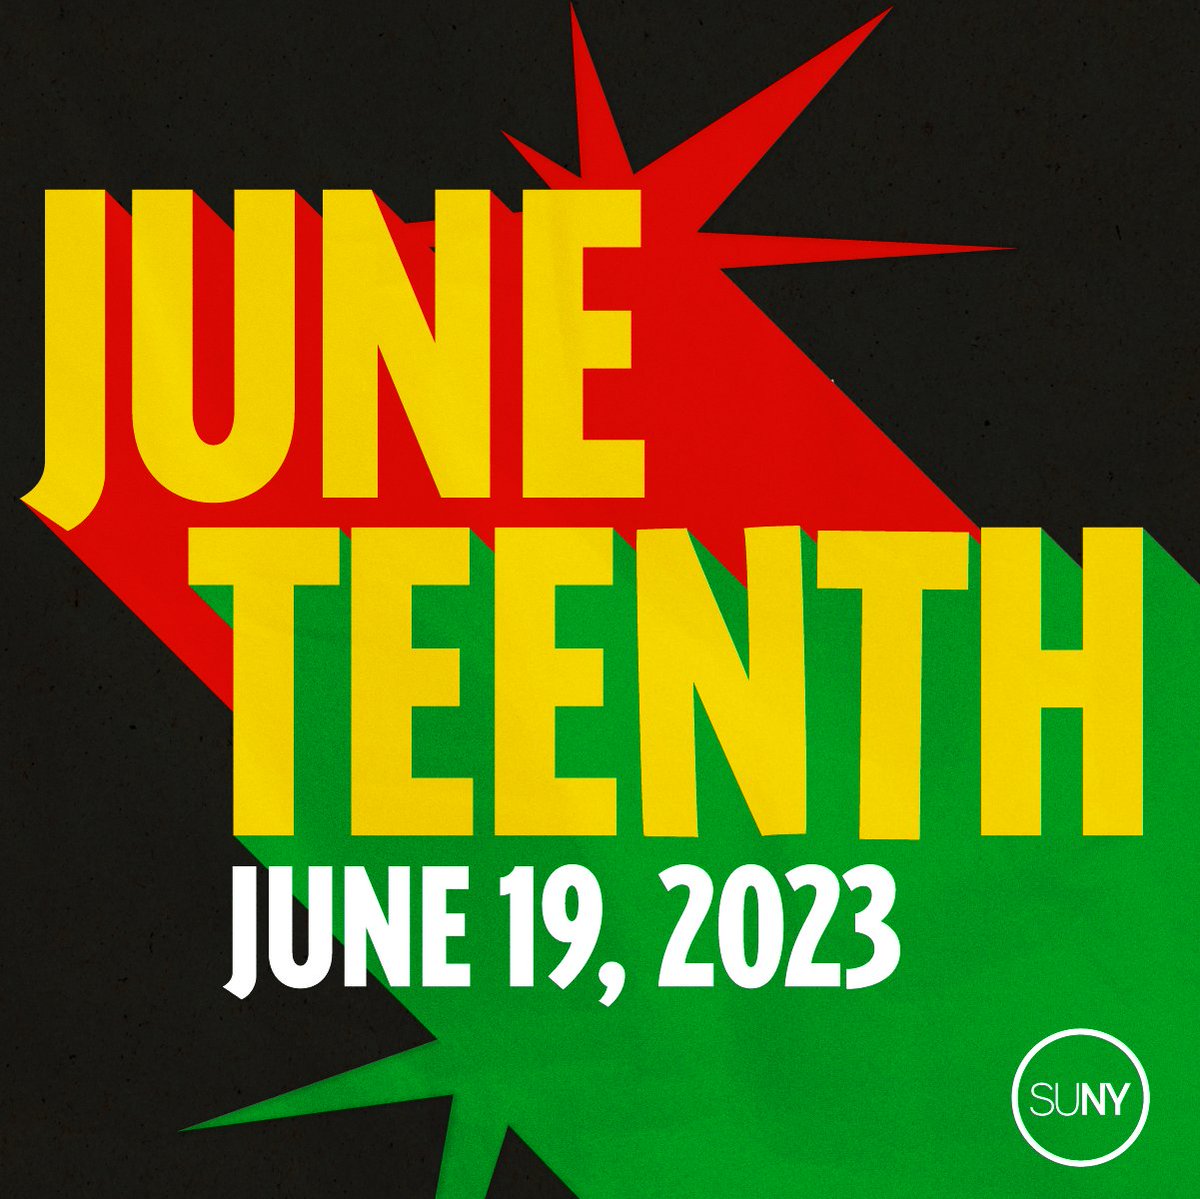 'Freeing yourself was one thing. Claiming ownership of that freed self was another.' — Toni Morrison We proudly honor #Juneteenth, celebrating the freedom of Black Americans while also recognizing systemic oppression, racial violence, and social struggle that persists today.